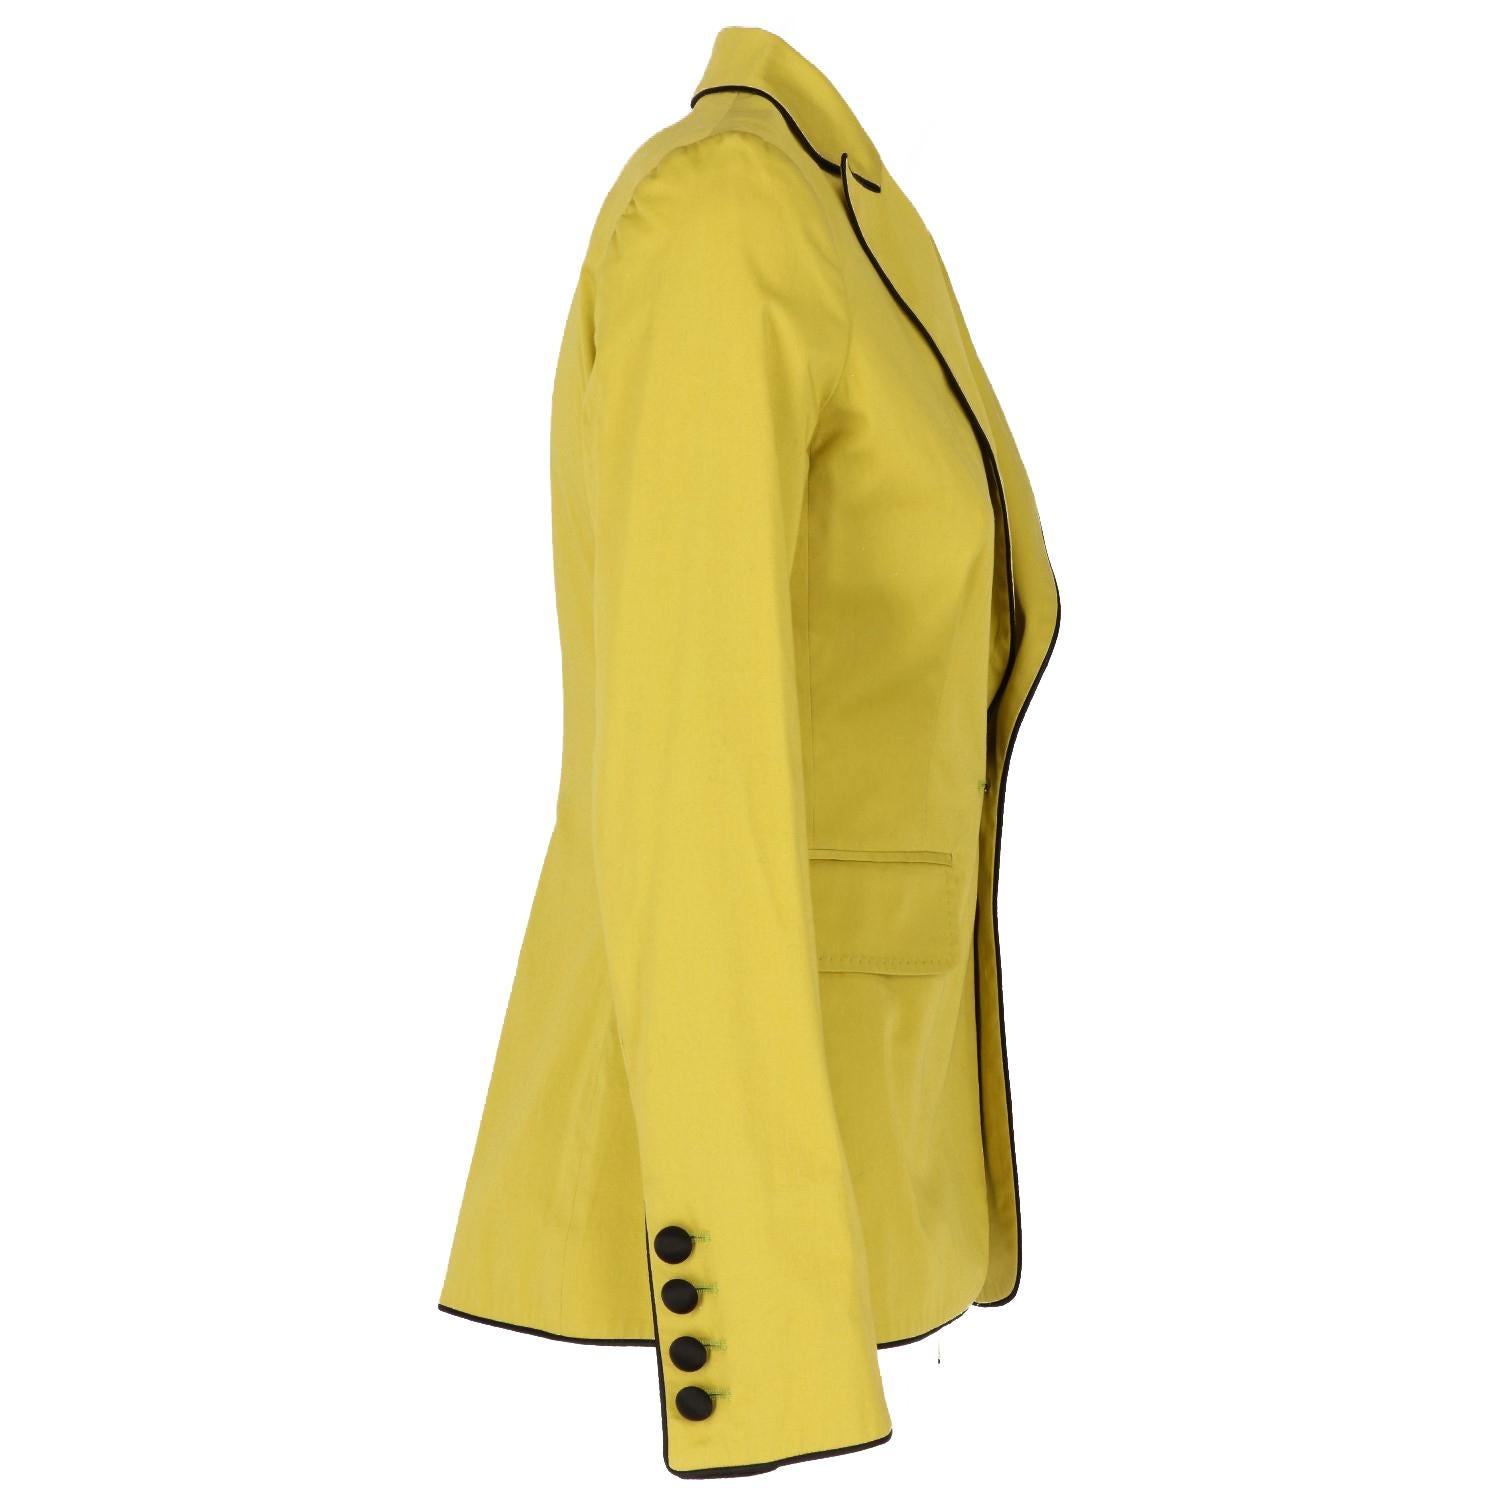 Moschino Cheap and Chic blazer jacket in acid green fabric

Years: 90s
Height: 63 cm
Bust: 43 cm
Waist: 35 cm
Sleeve: 63 cm
Shoulders: 35 cm

Details: green acid color fabric, with black profiles, two flap pockets and buttoned cuffs.